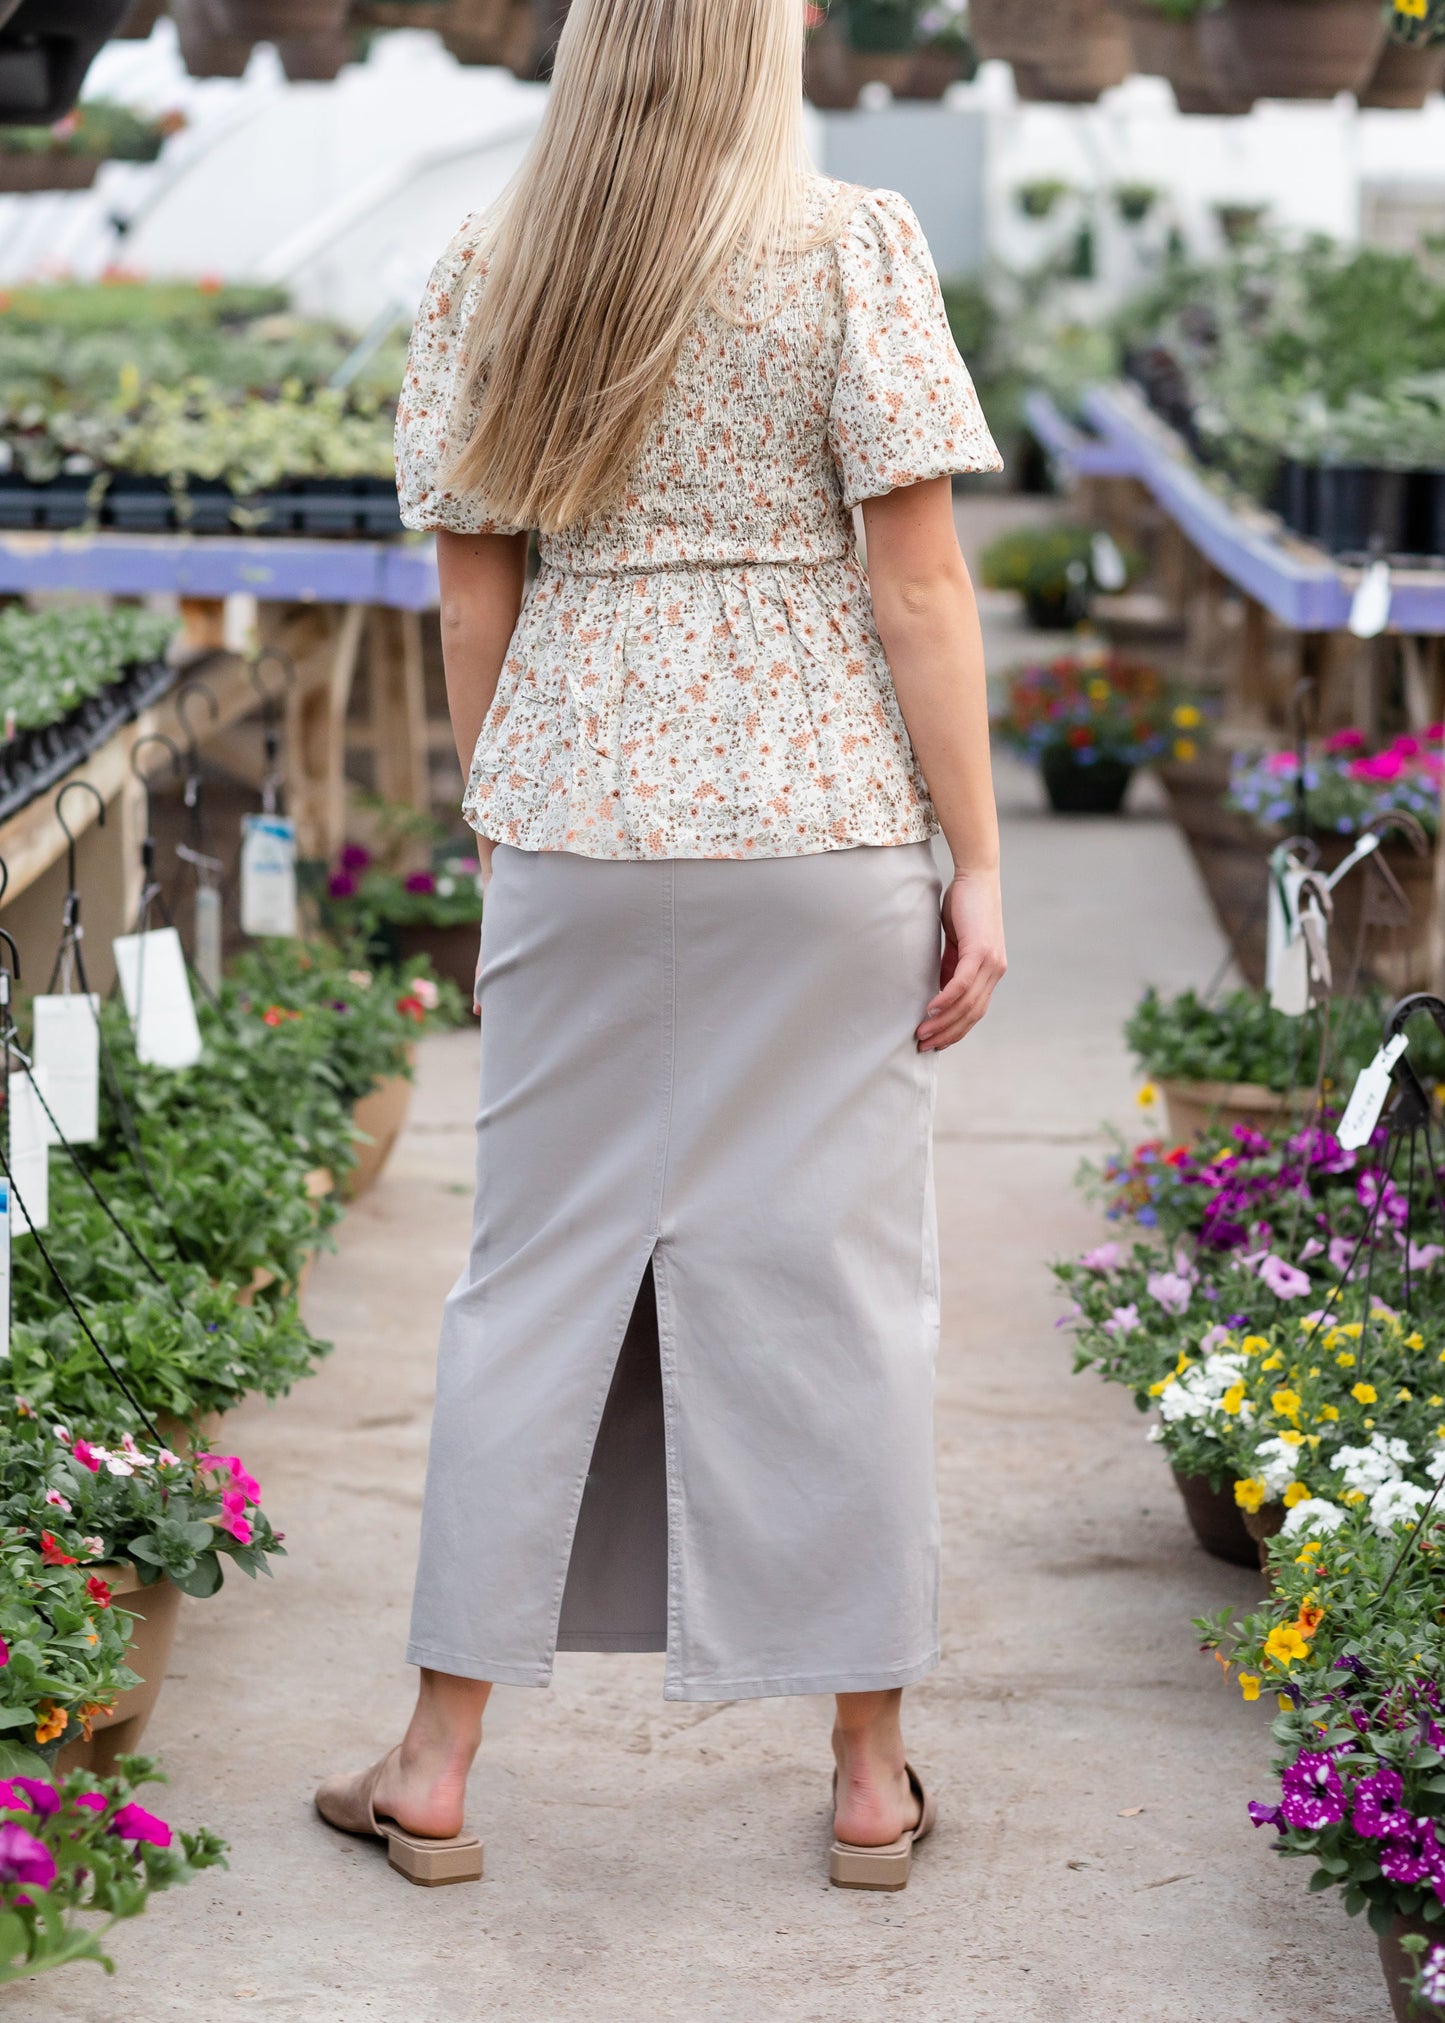 This Inherit original is classic + simple. The Stella Stone Gray Long Denim Maxi Skirt is a wardrobe staple, and one of our best sellers, we're so happy it is back! The moss olive long denim is accented by stitching and the pockets include a simple and elegant design. The straight and simple style is graced with a back slit below the knees for easy walking. No details were missed with this skirt!